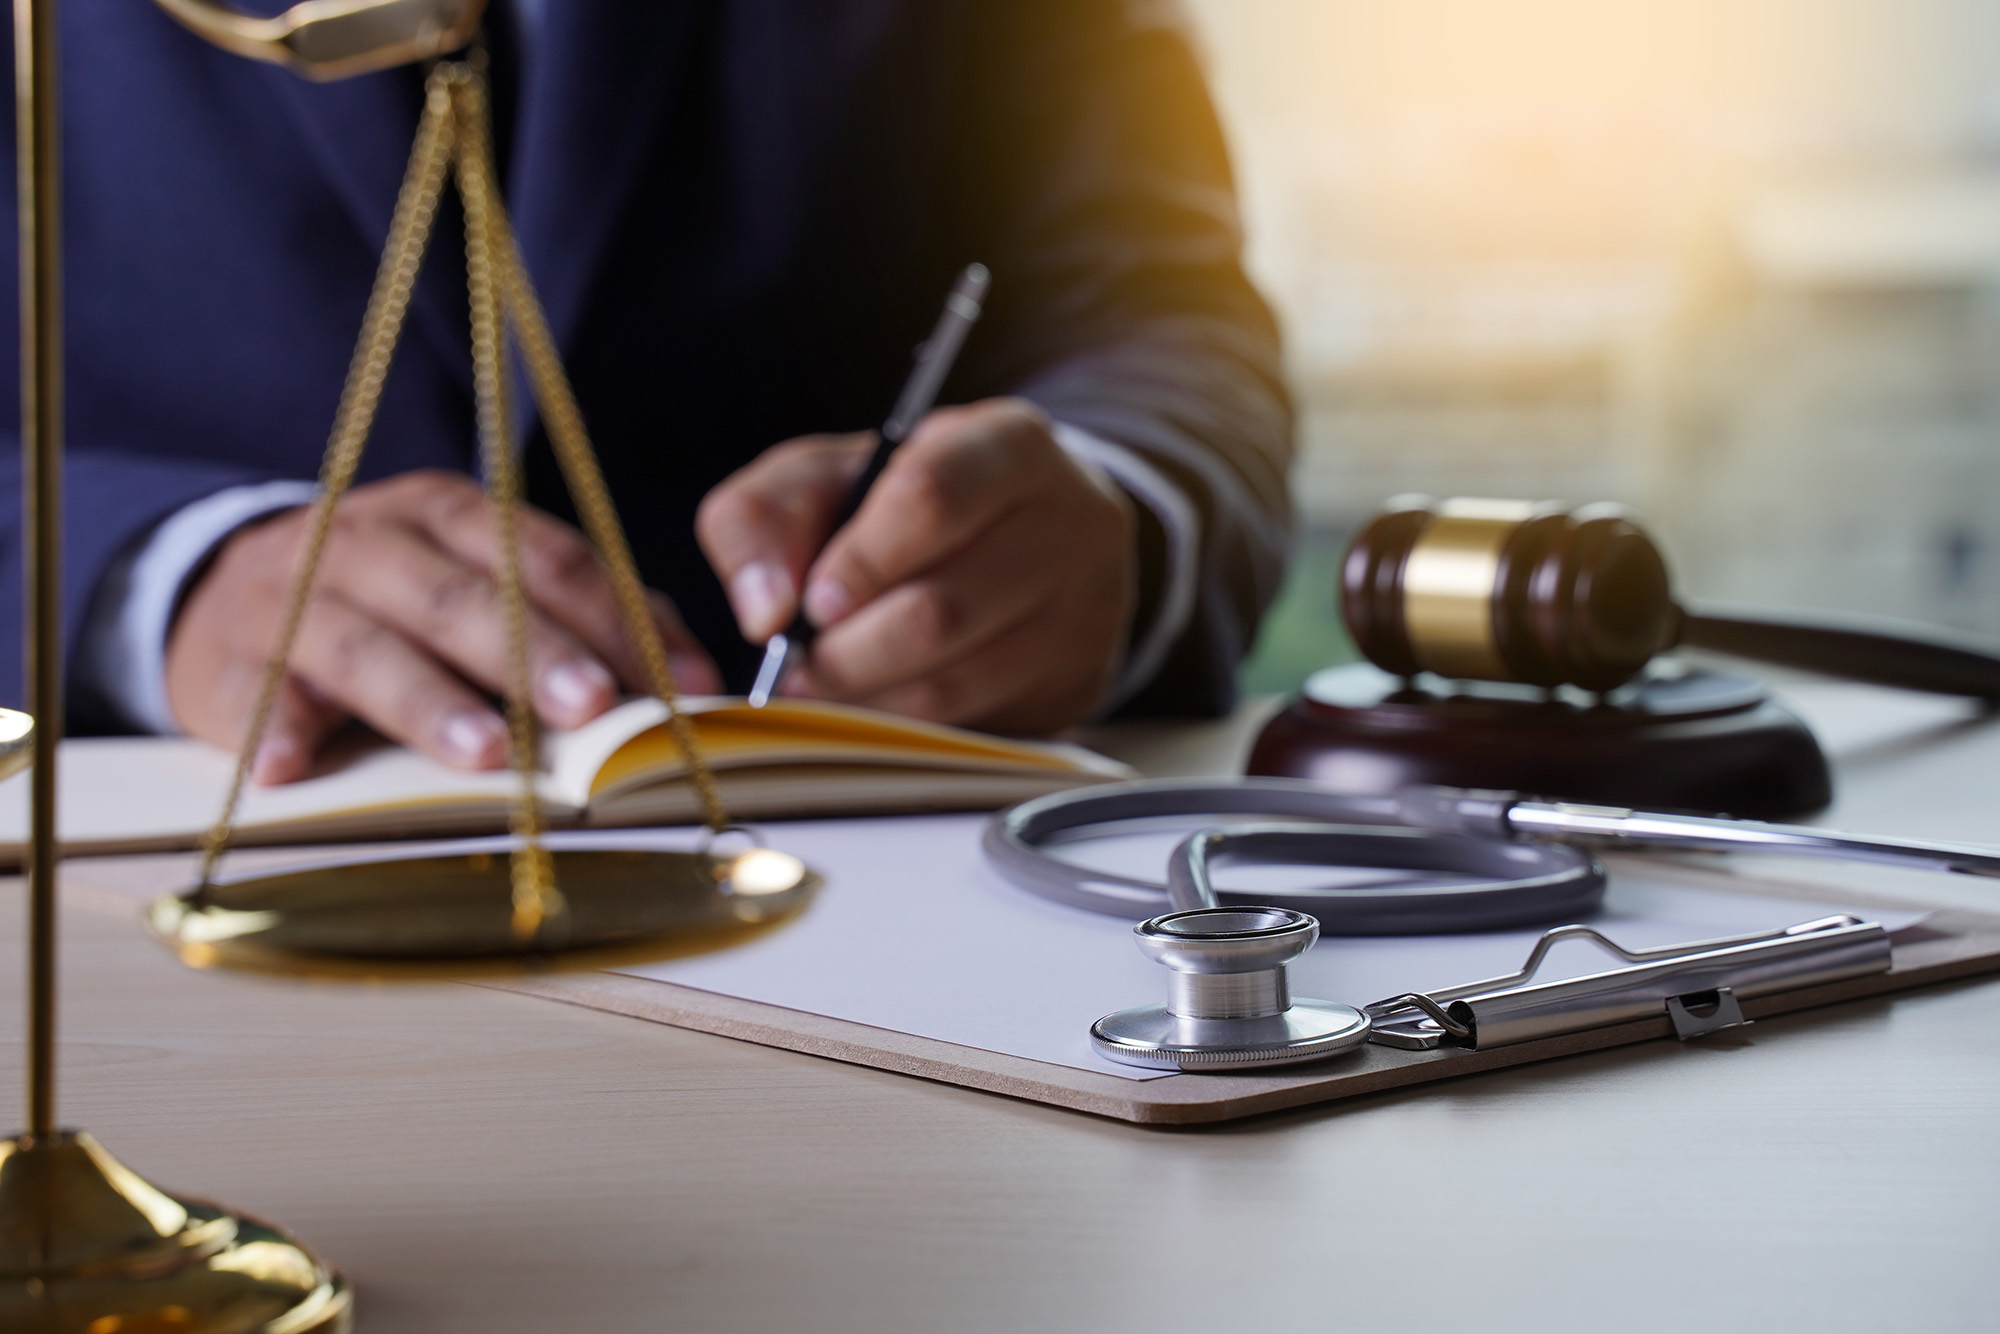 Medical Malpractice Is the Most Severe Loss in Senior Care Facilities: A doctor sitting at a table with a gavel, stethoscope in the foreground.